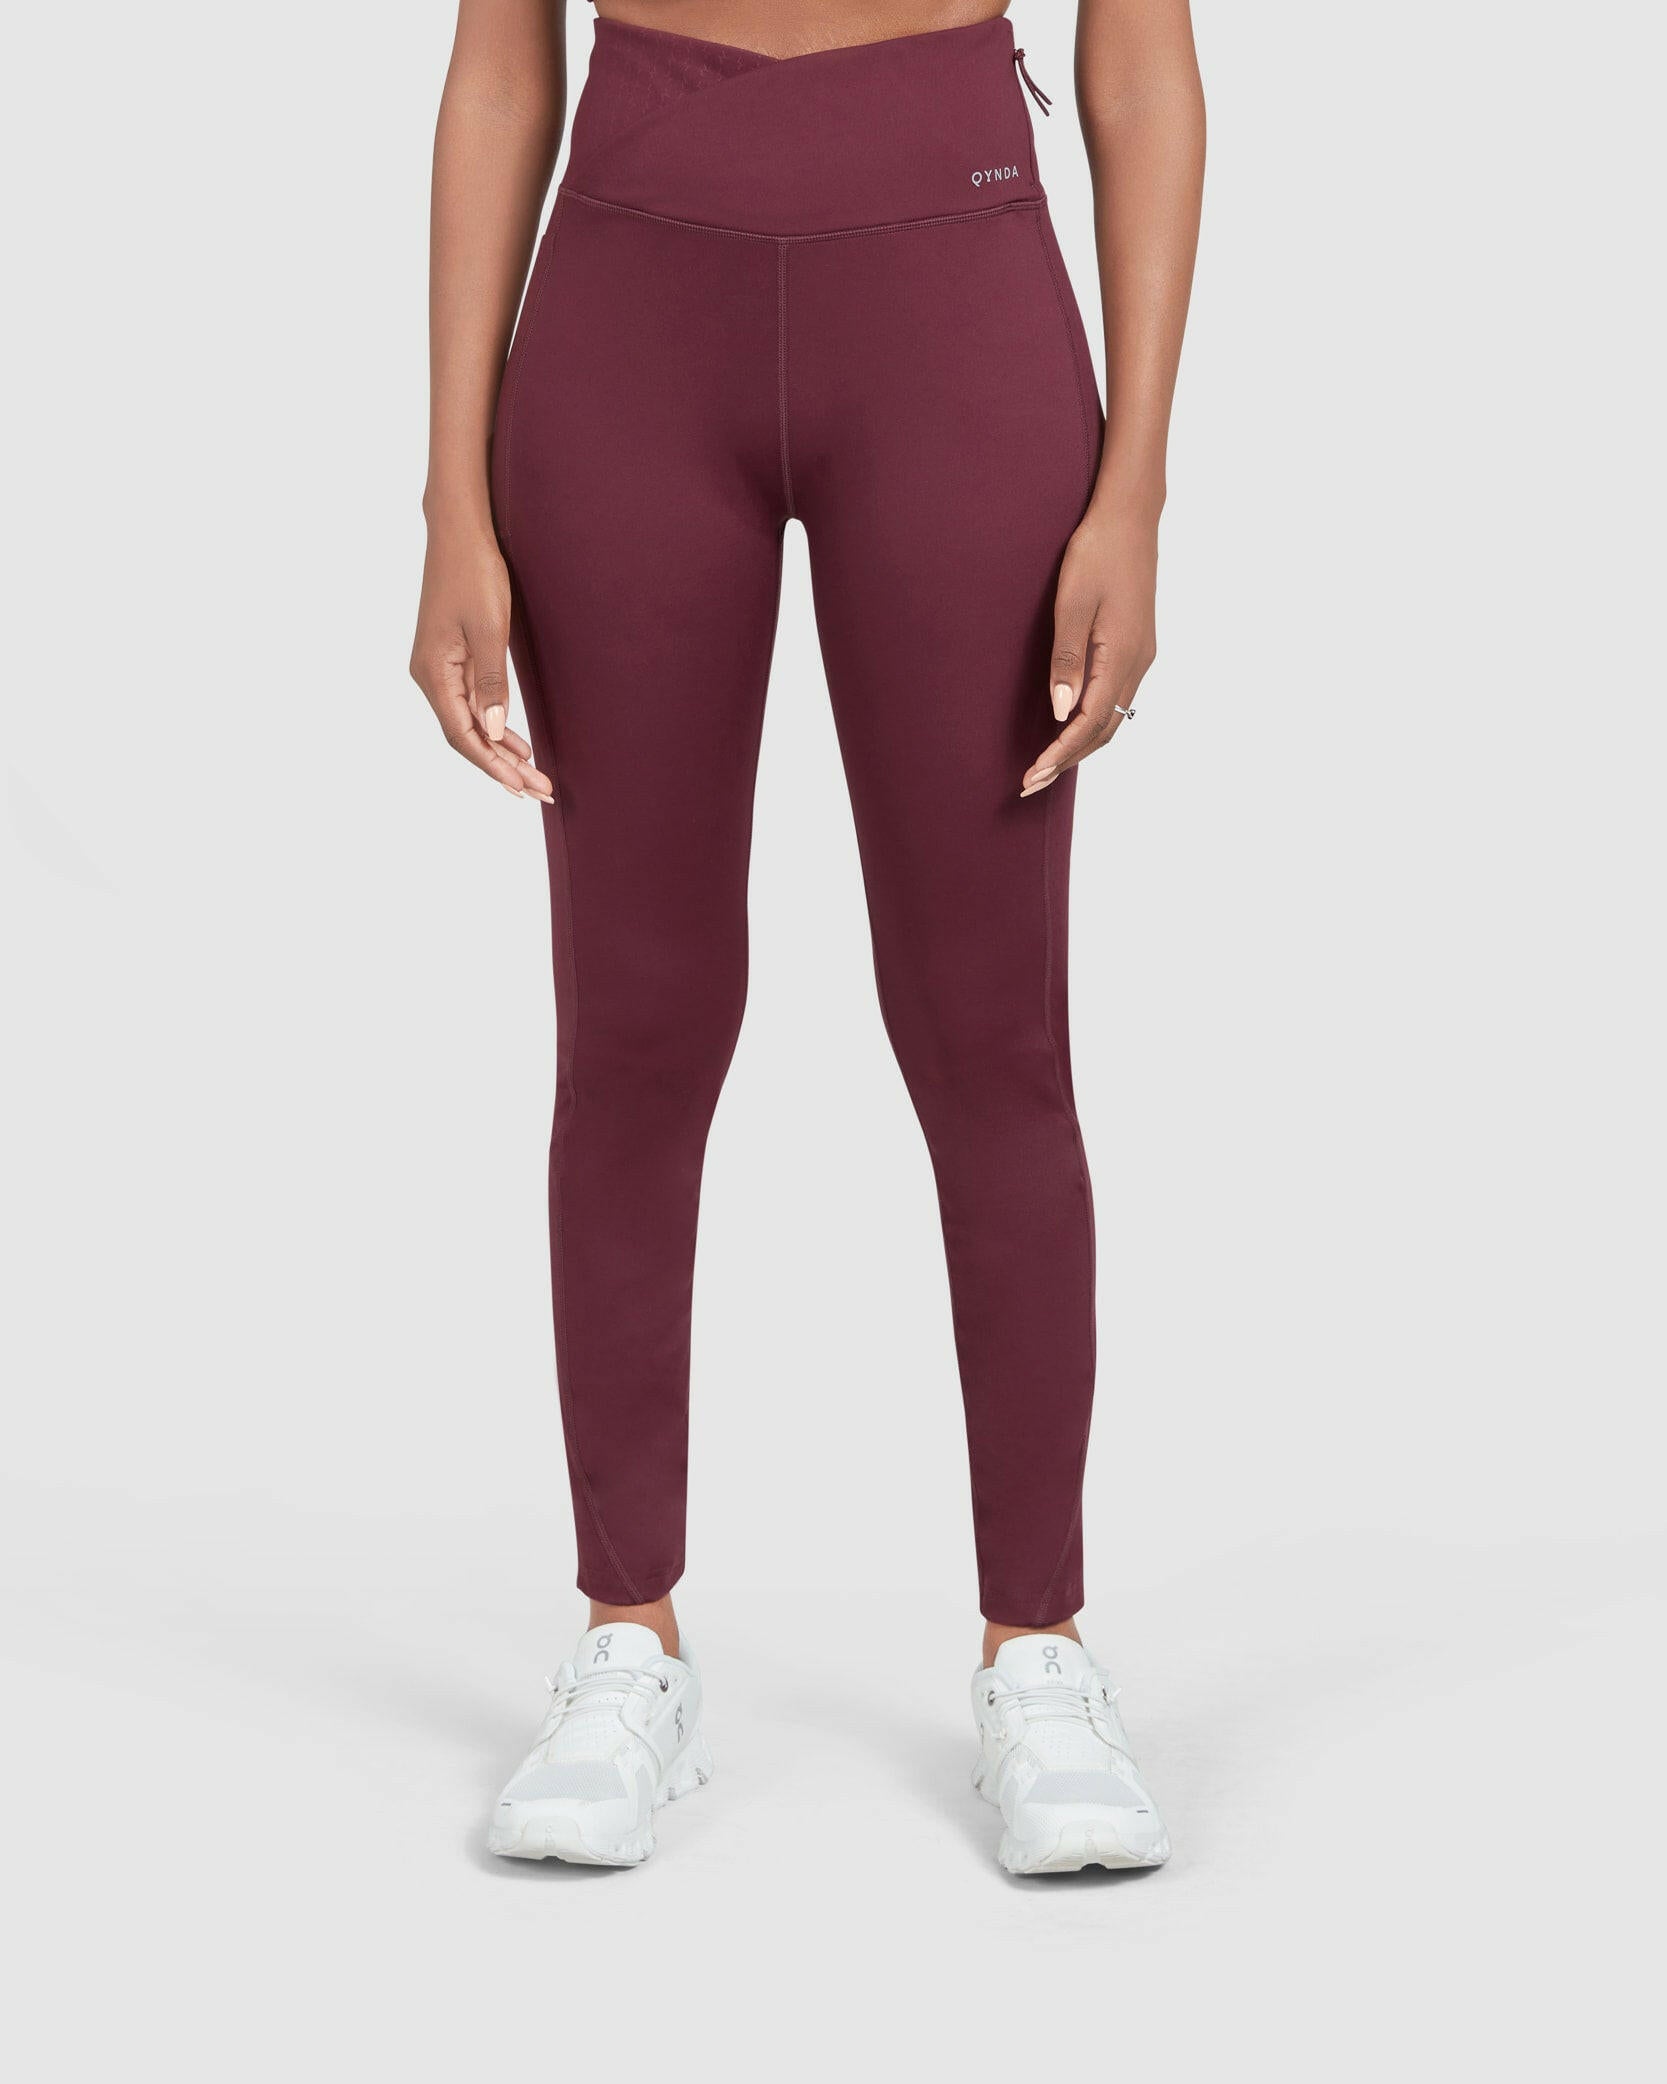 A model wearing Maroon Modest LADINA LEGGINGS by Qynda against a plain background, showcasing the fit and style of athleisure wear.